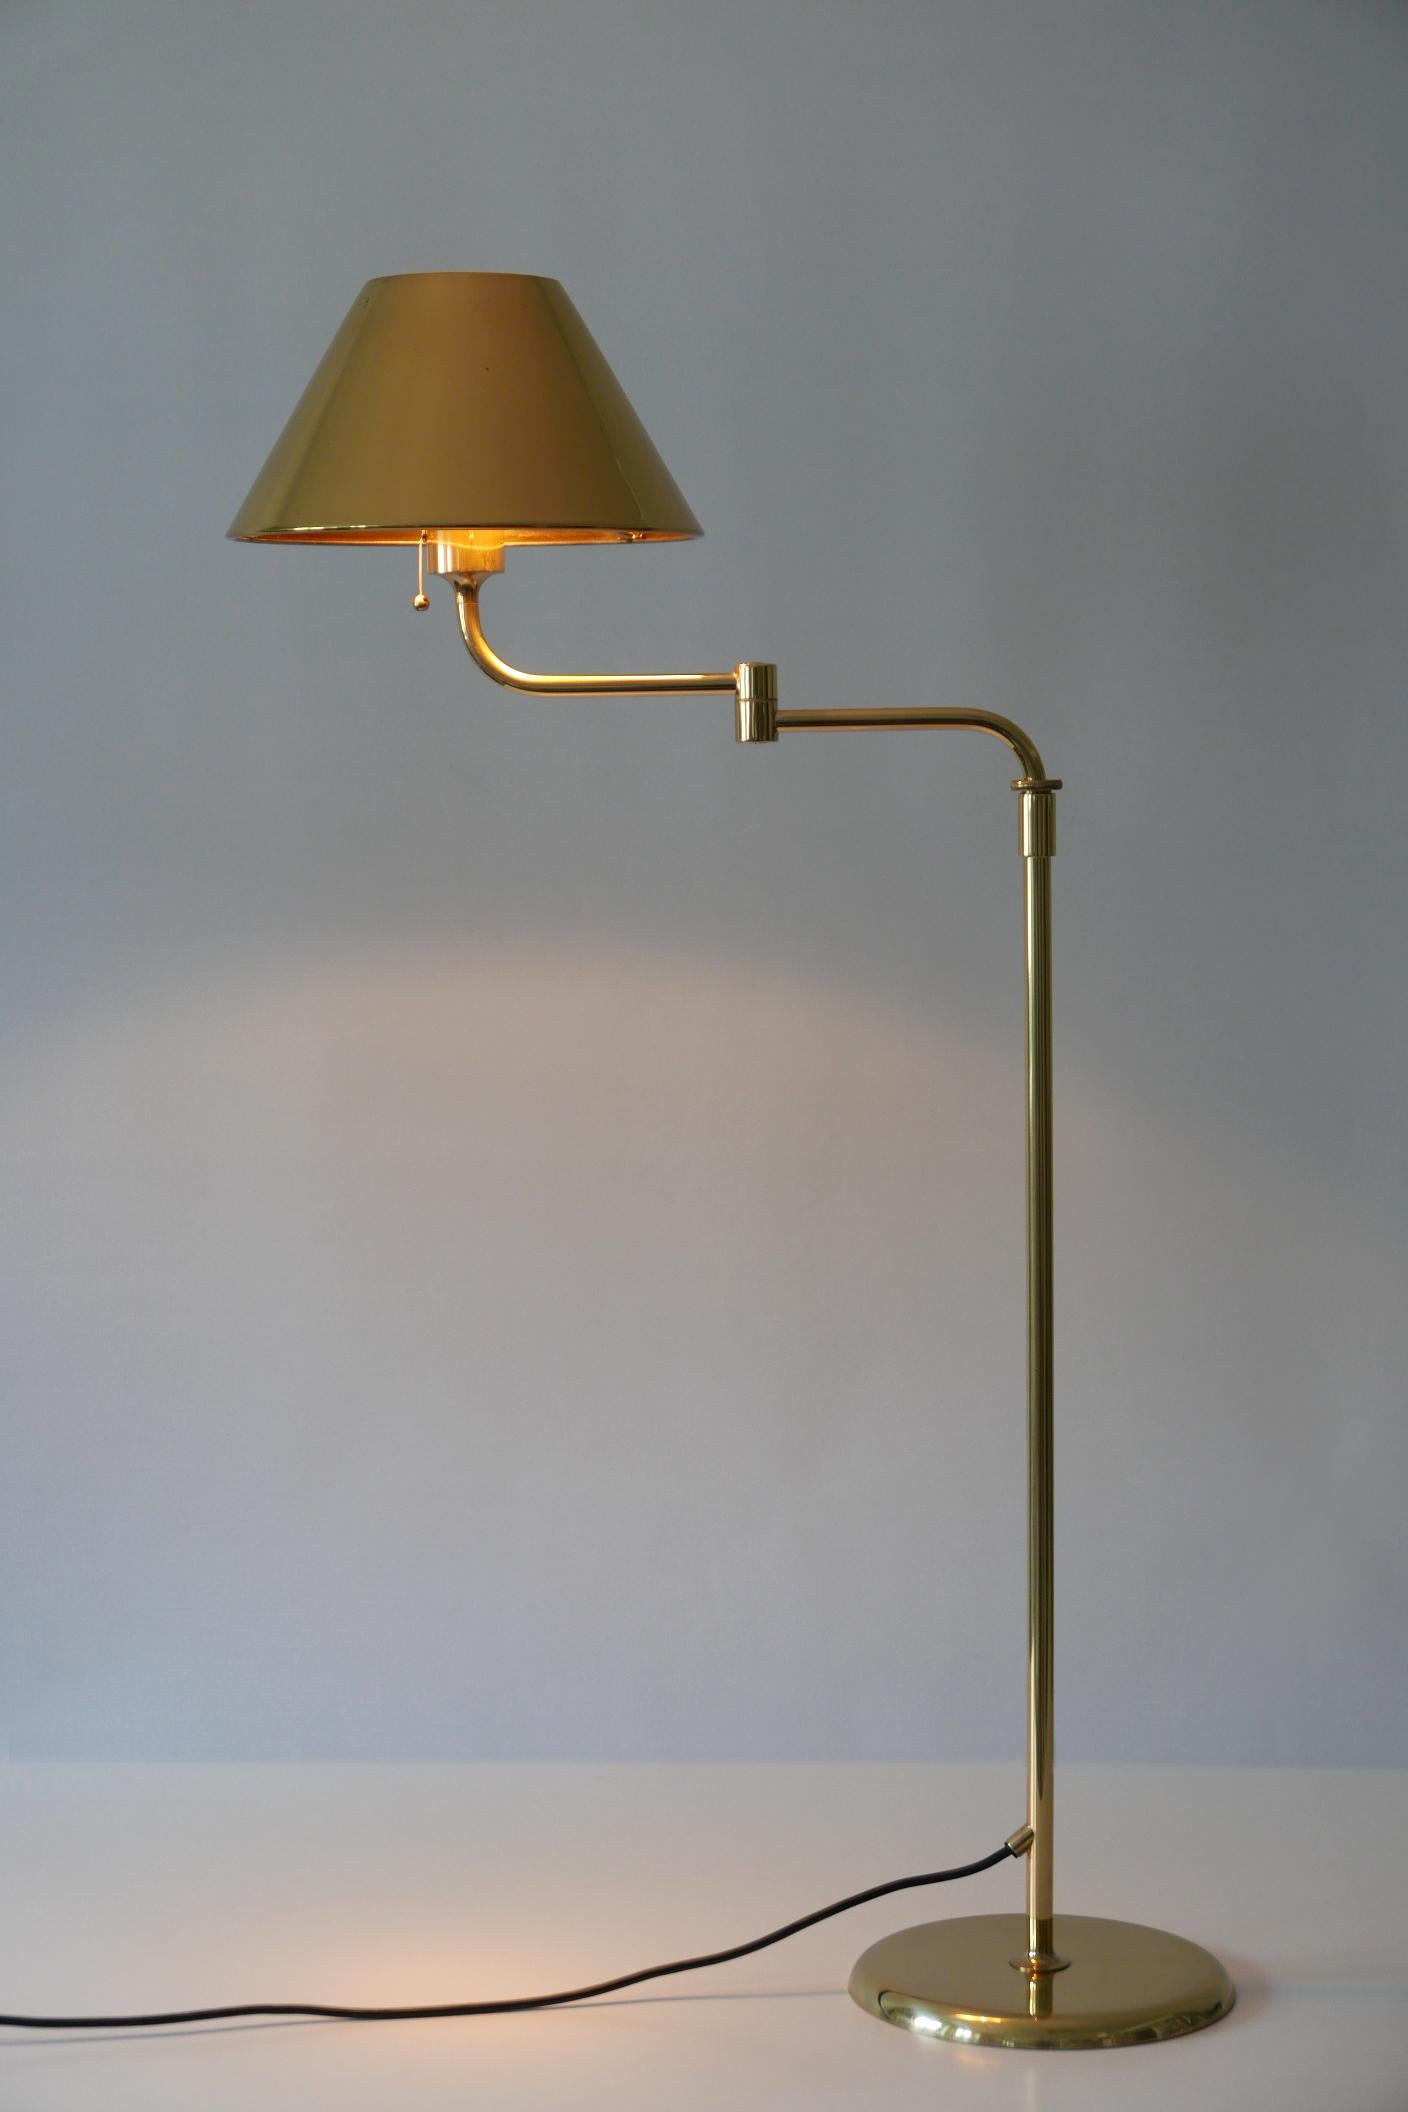 Articulated Brass Floor Lamp or Reading Light by Florian Schulz 1980s Germany 9